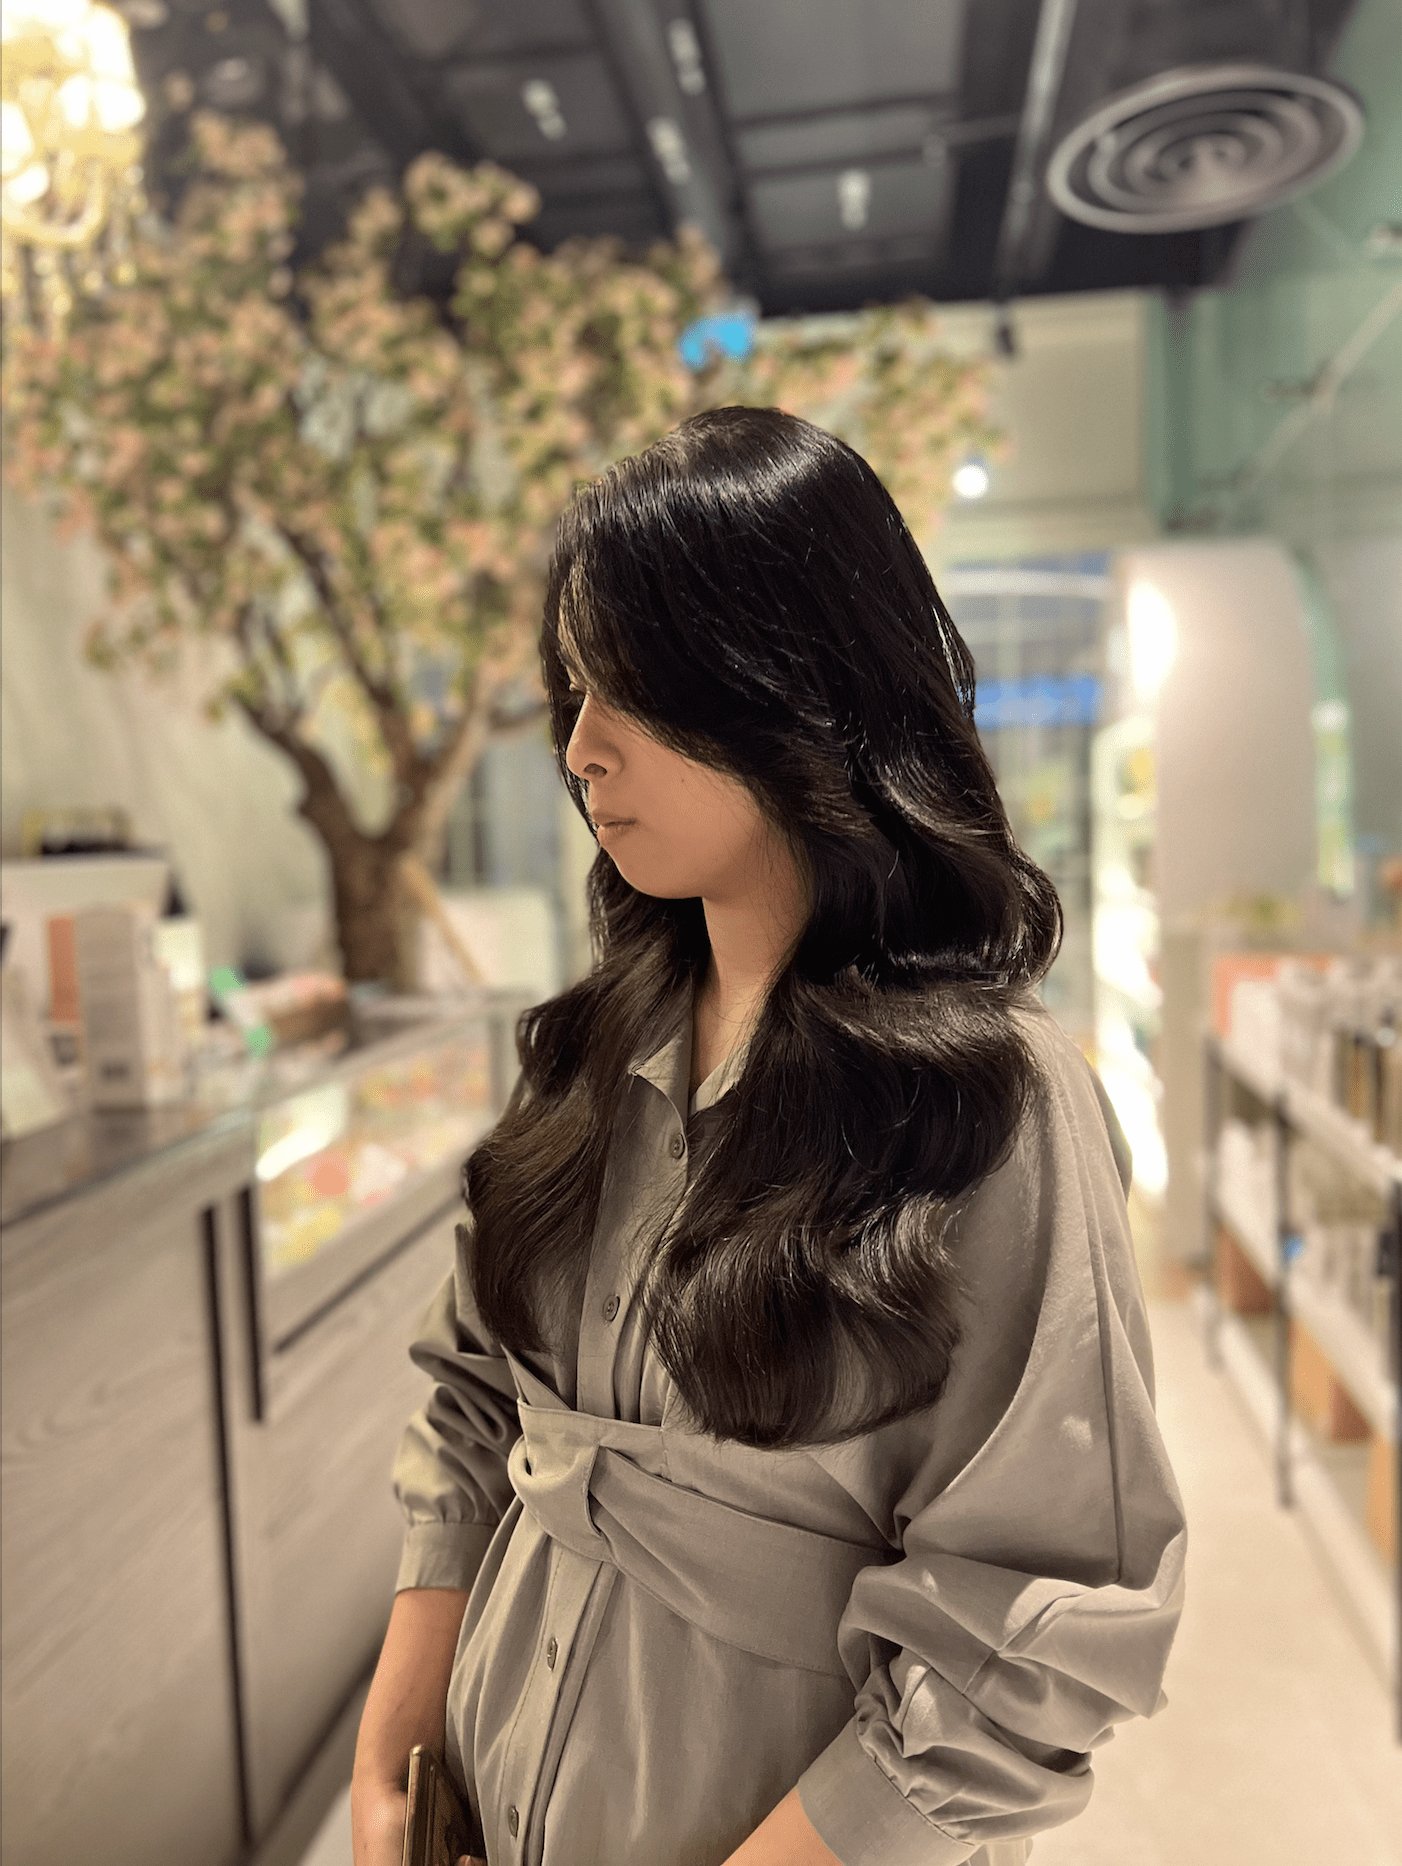 10 Things To Know Before Getting a Korean Perm - Team Salon Singapore